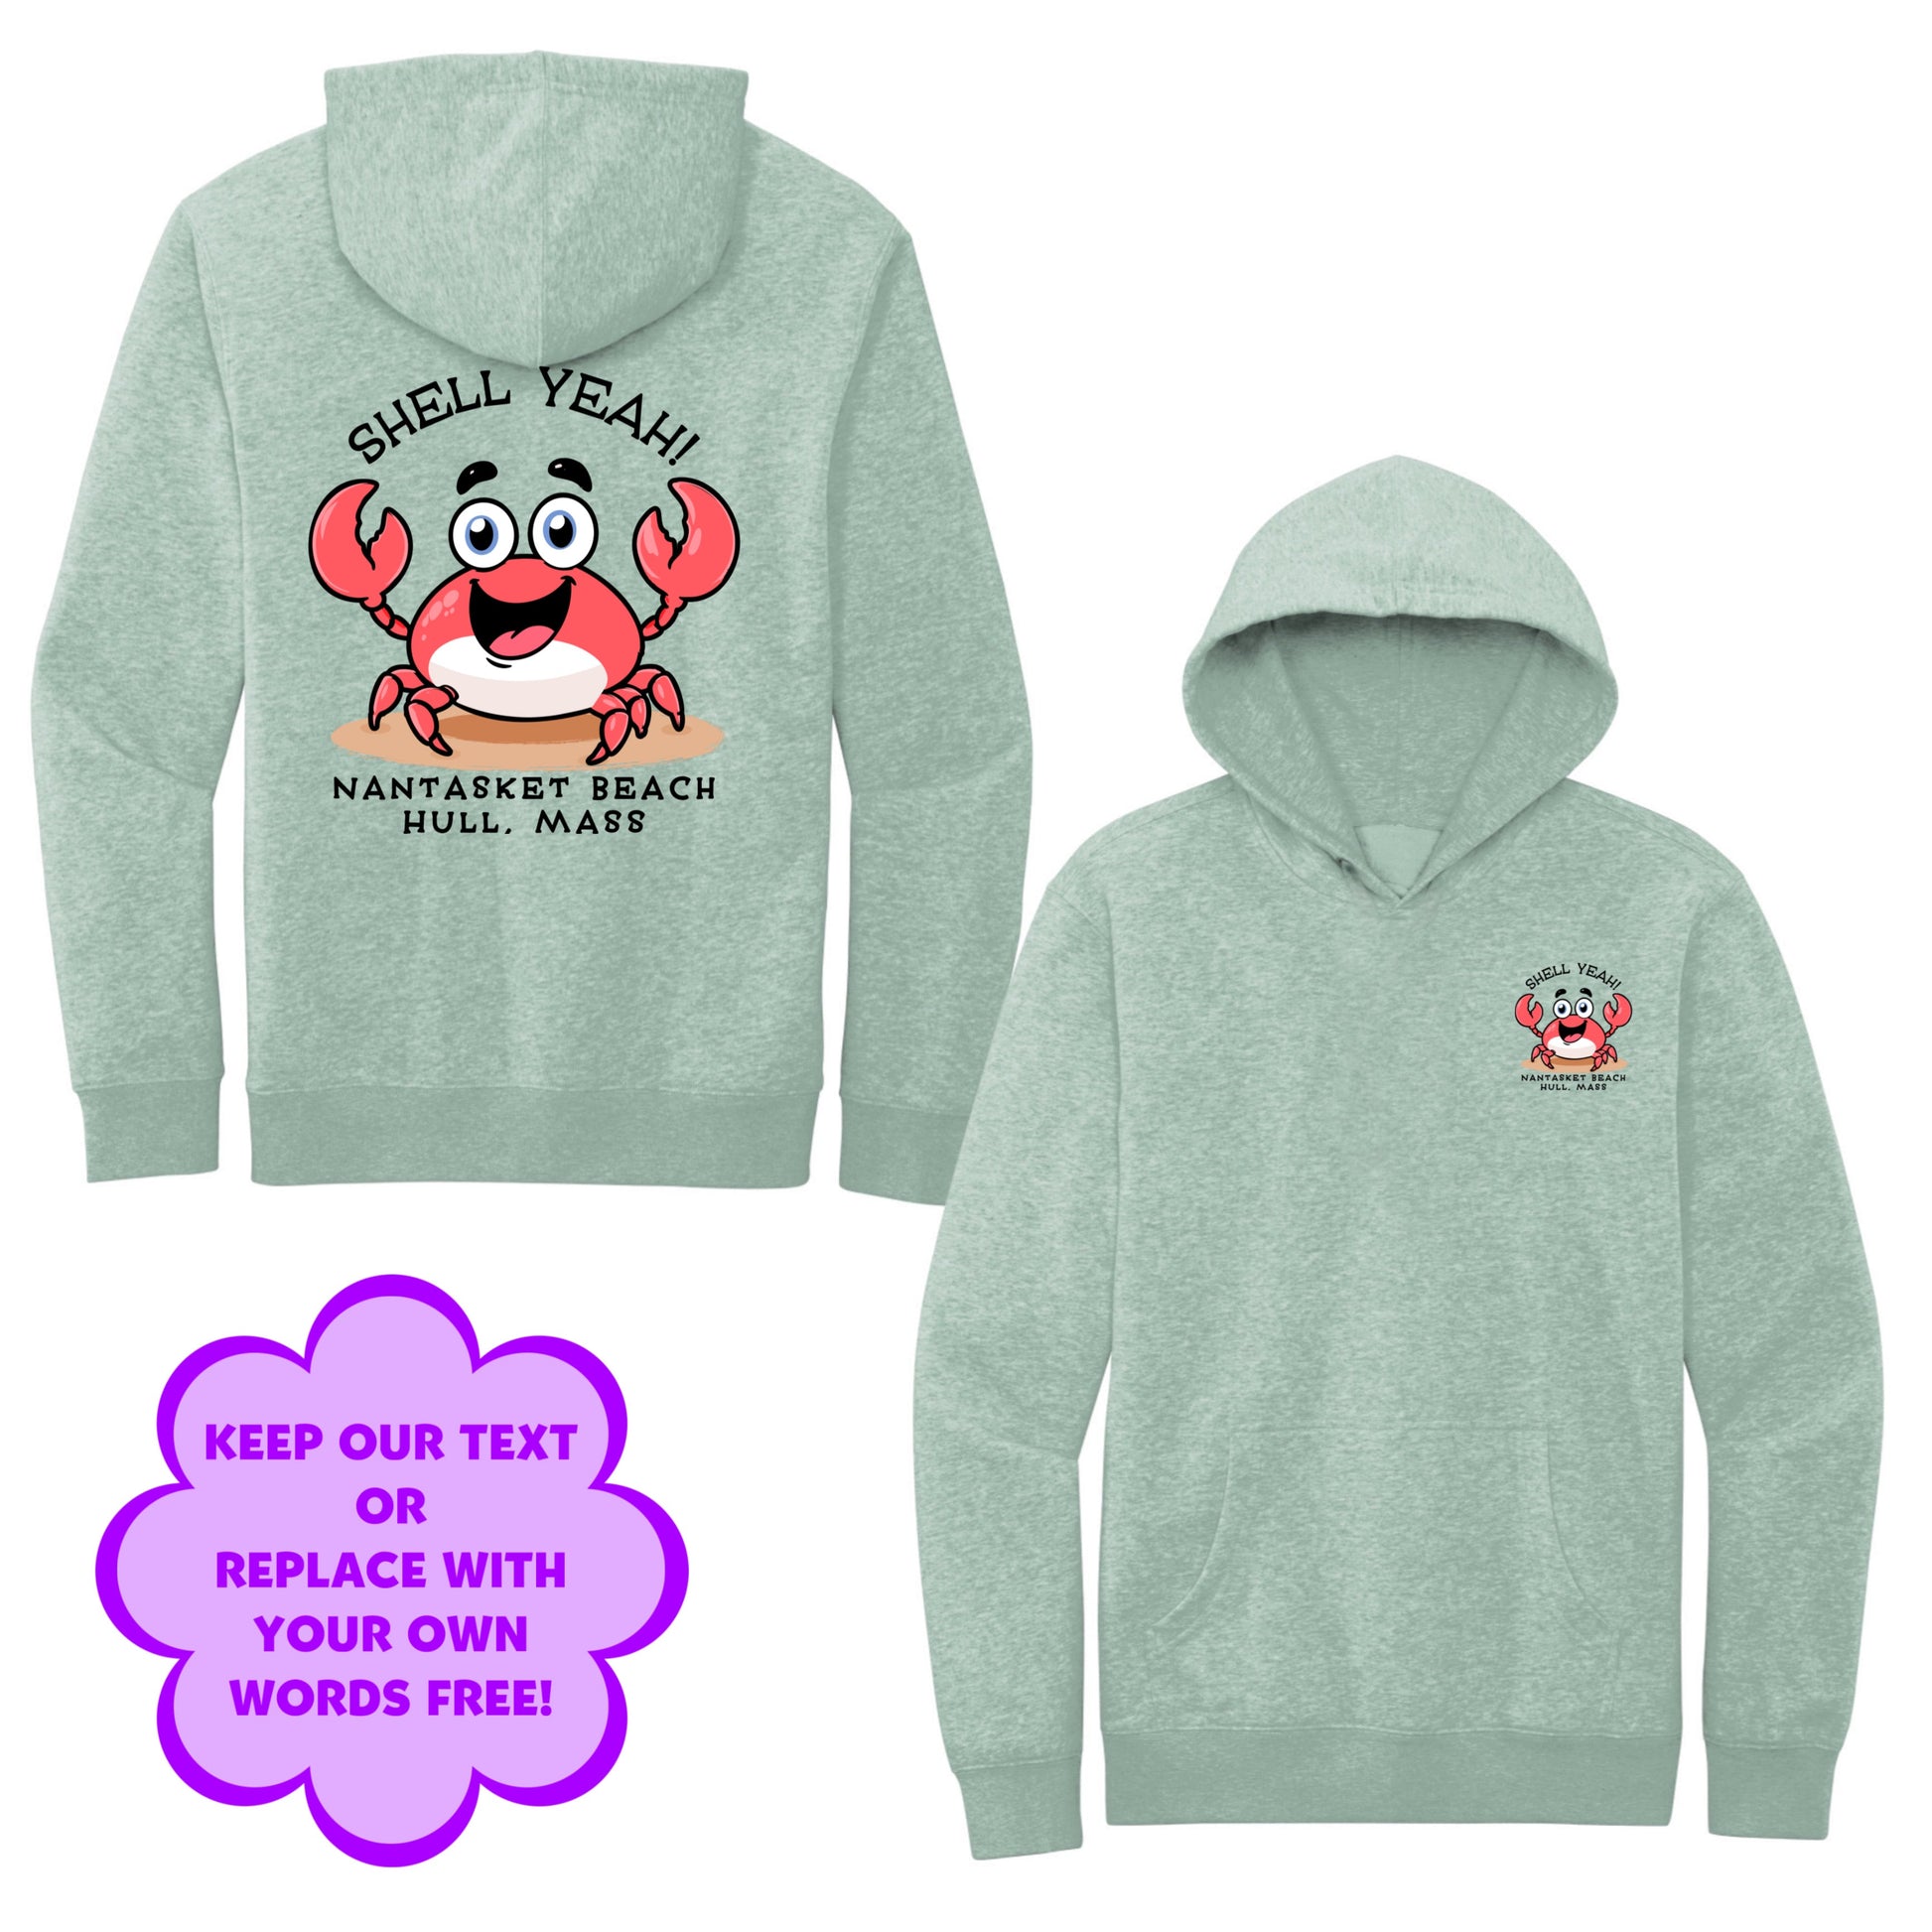 Personalize Free Beach Crabs, Hull, Adult Fleece Hoodies from Baby Squid Ink 